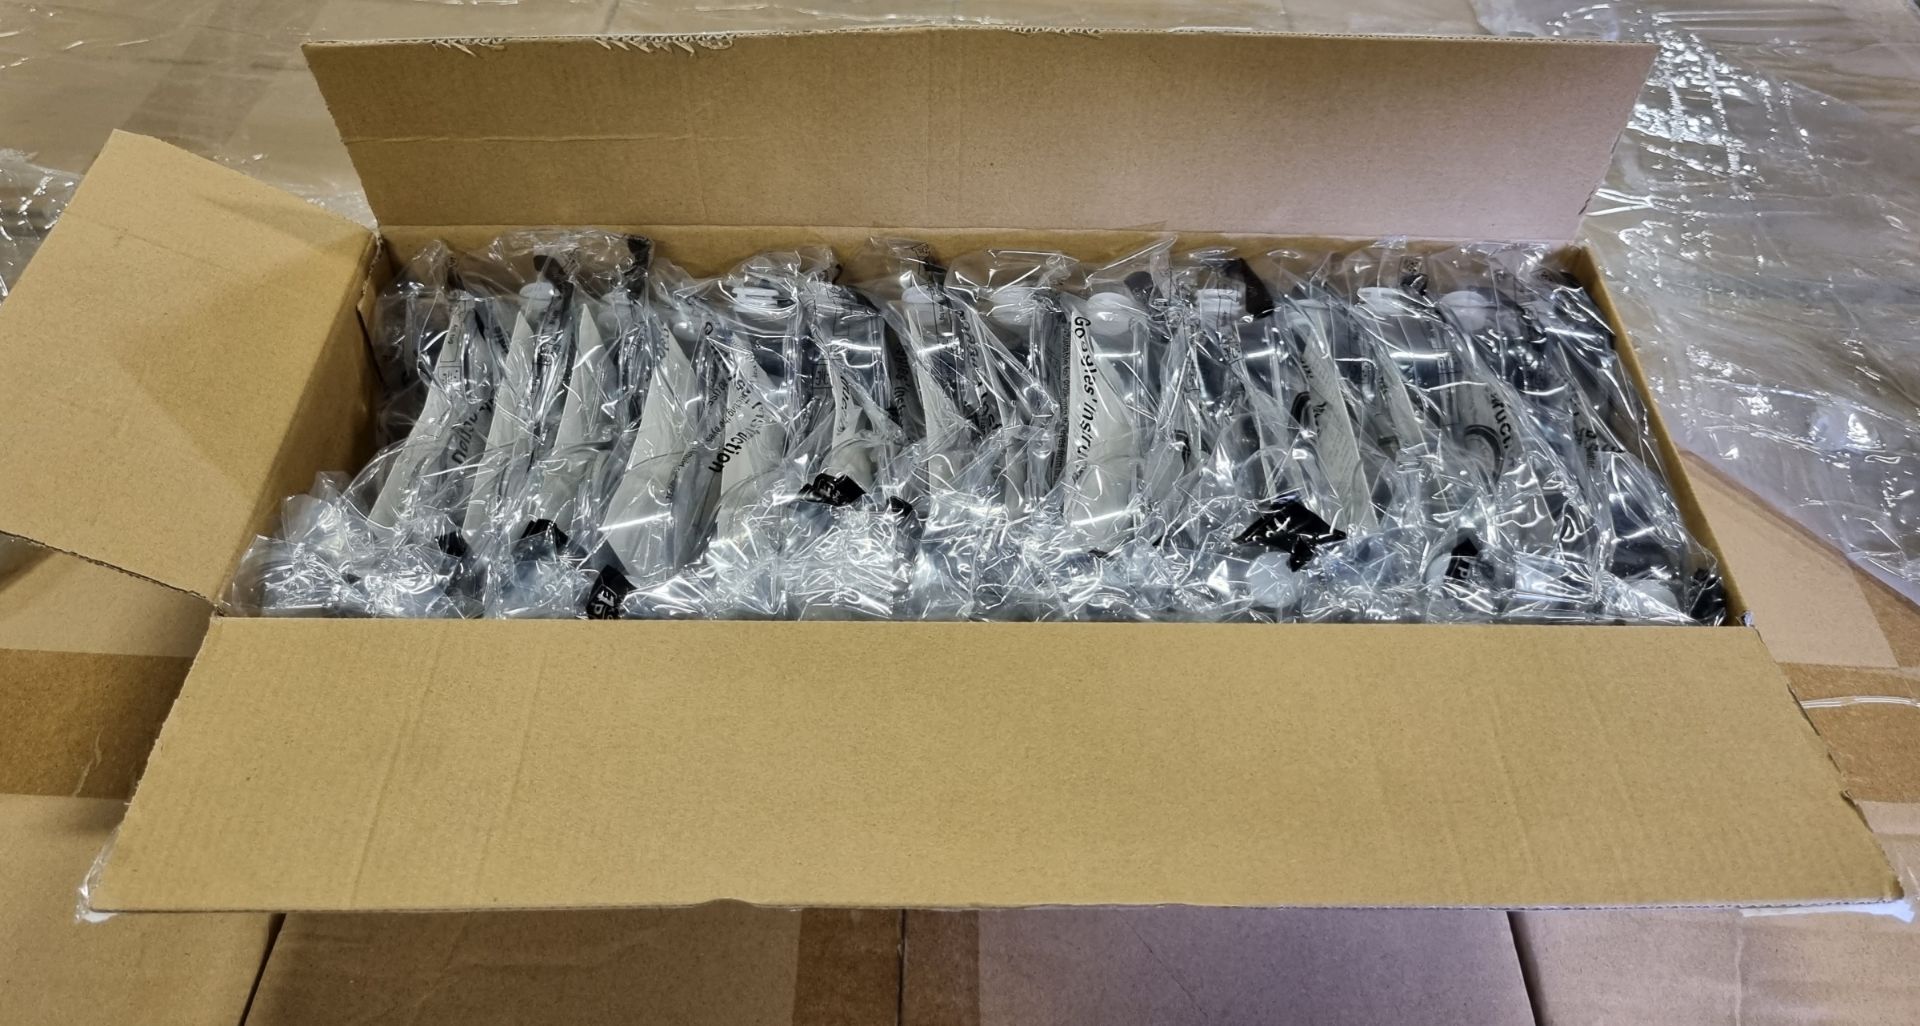 12x boxes of Tapmedic LLC safety goggles - 150 pairs per box - Image 3 of 5